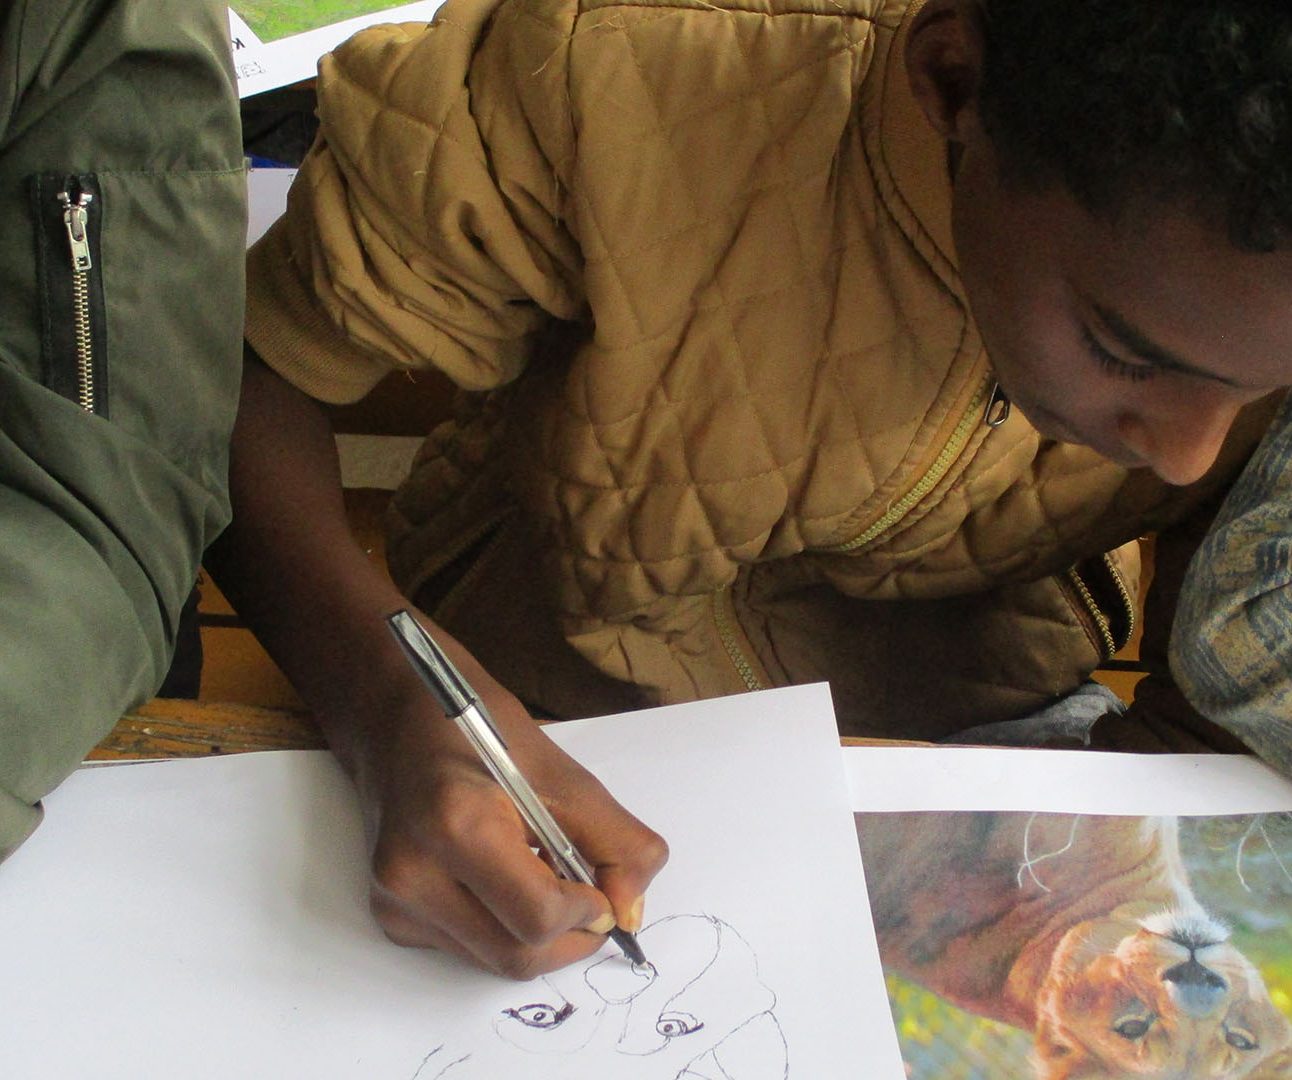 A boy leans over a desk holding a pencil, drawing a lion from a photo